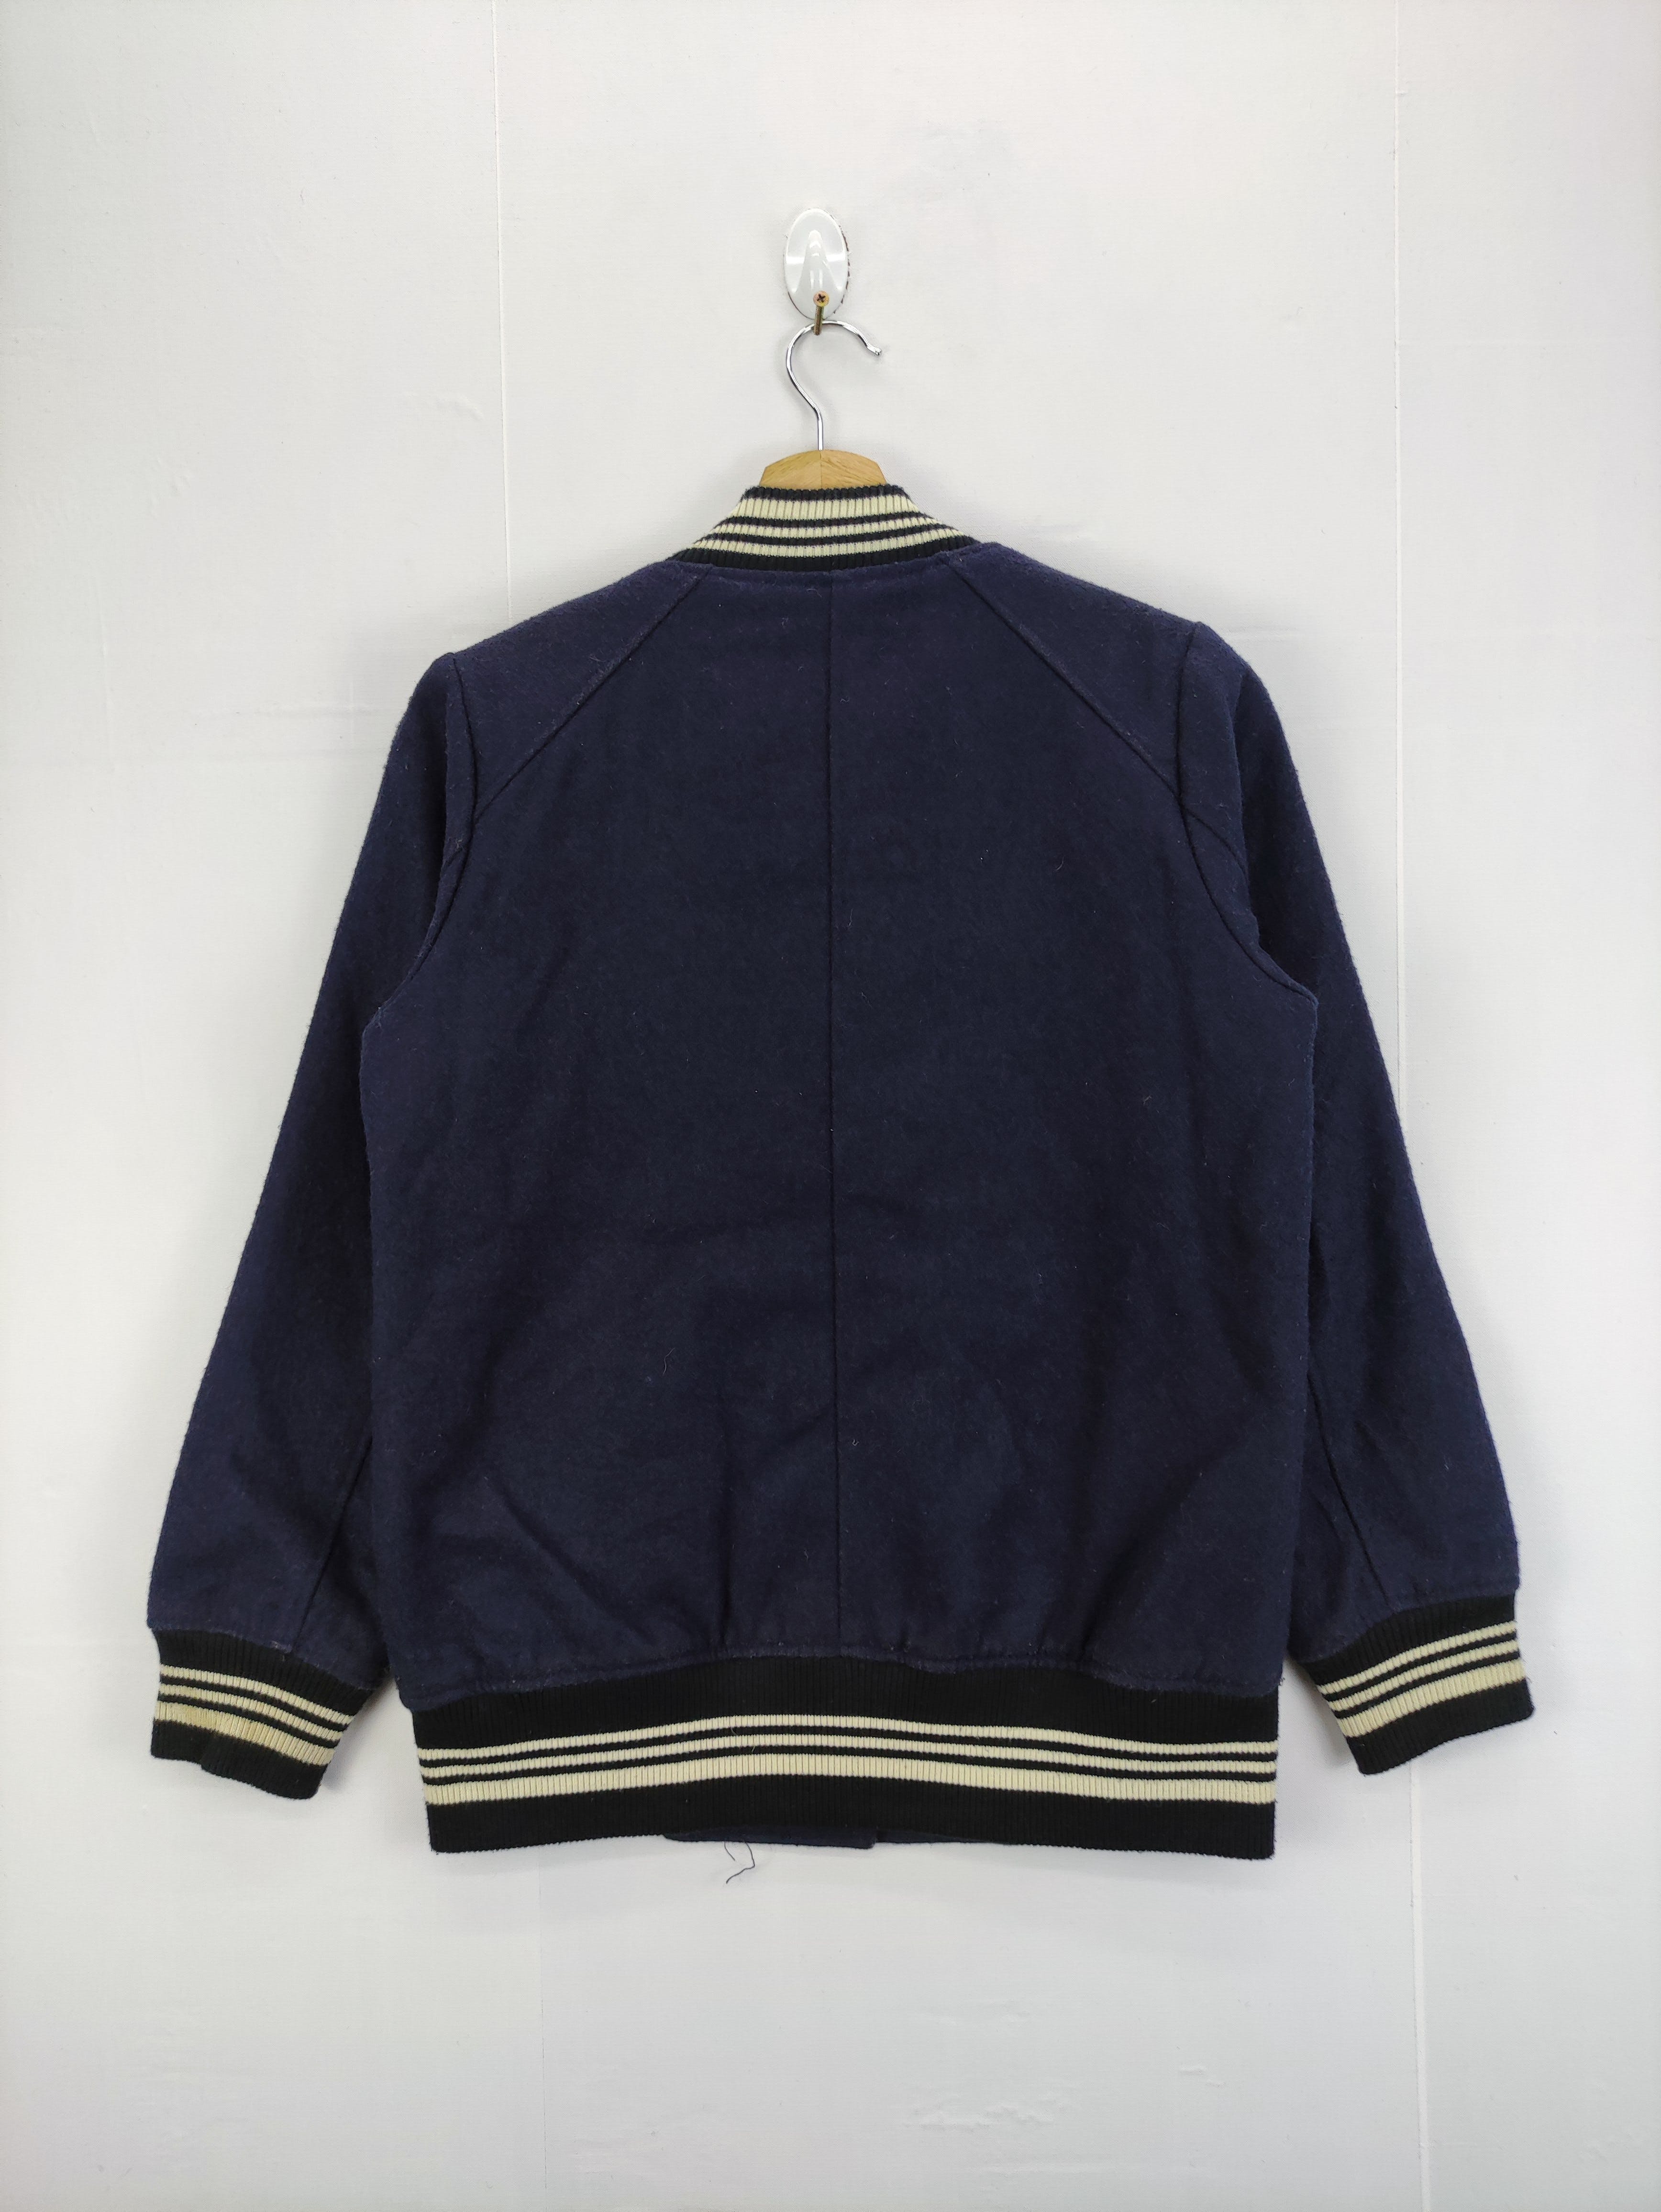 Vintage Varsity Wool Jacket Snap Button By The Emporium - 7